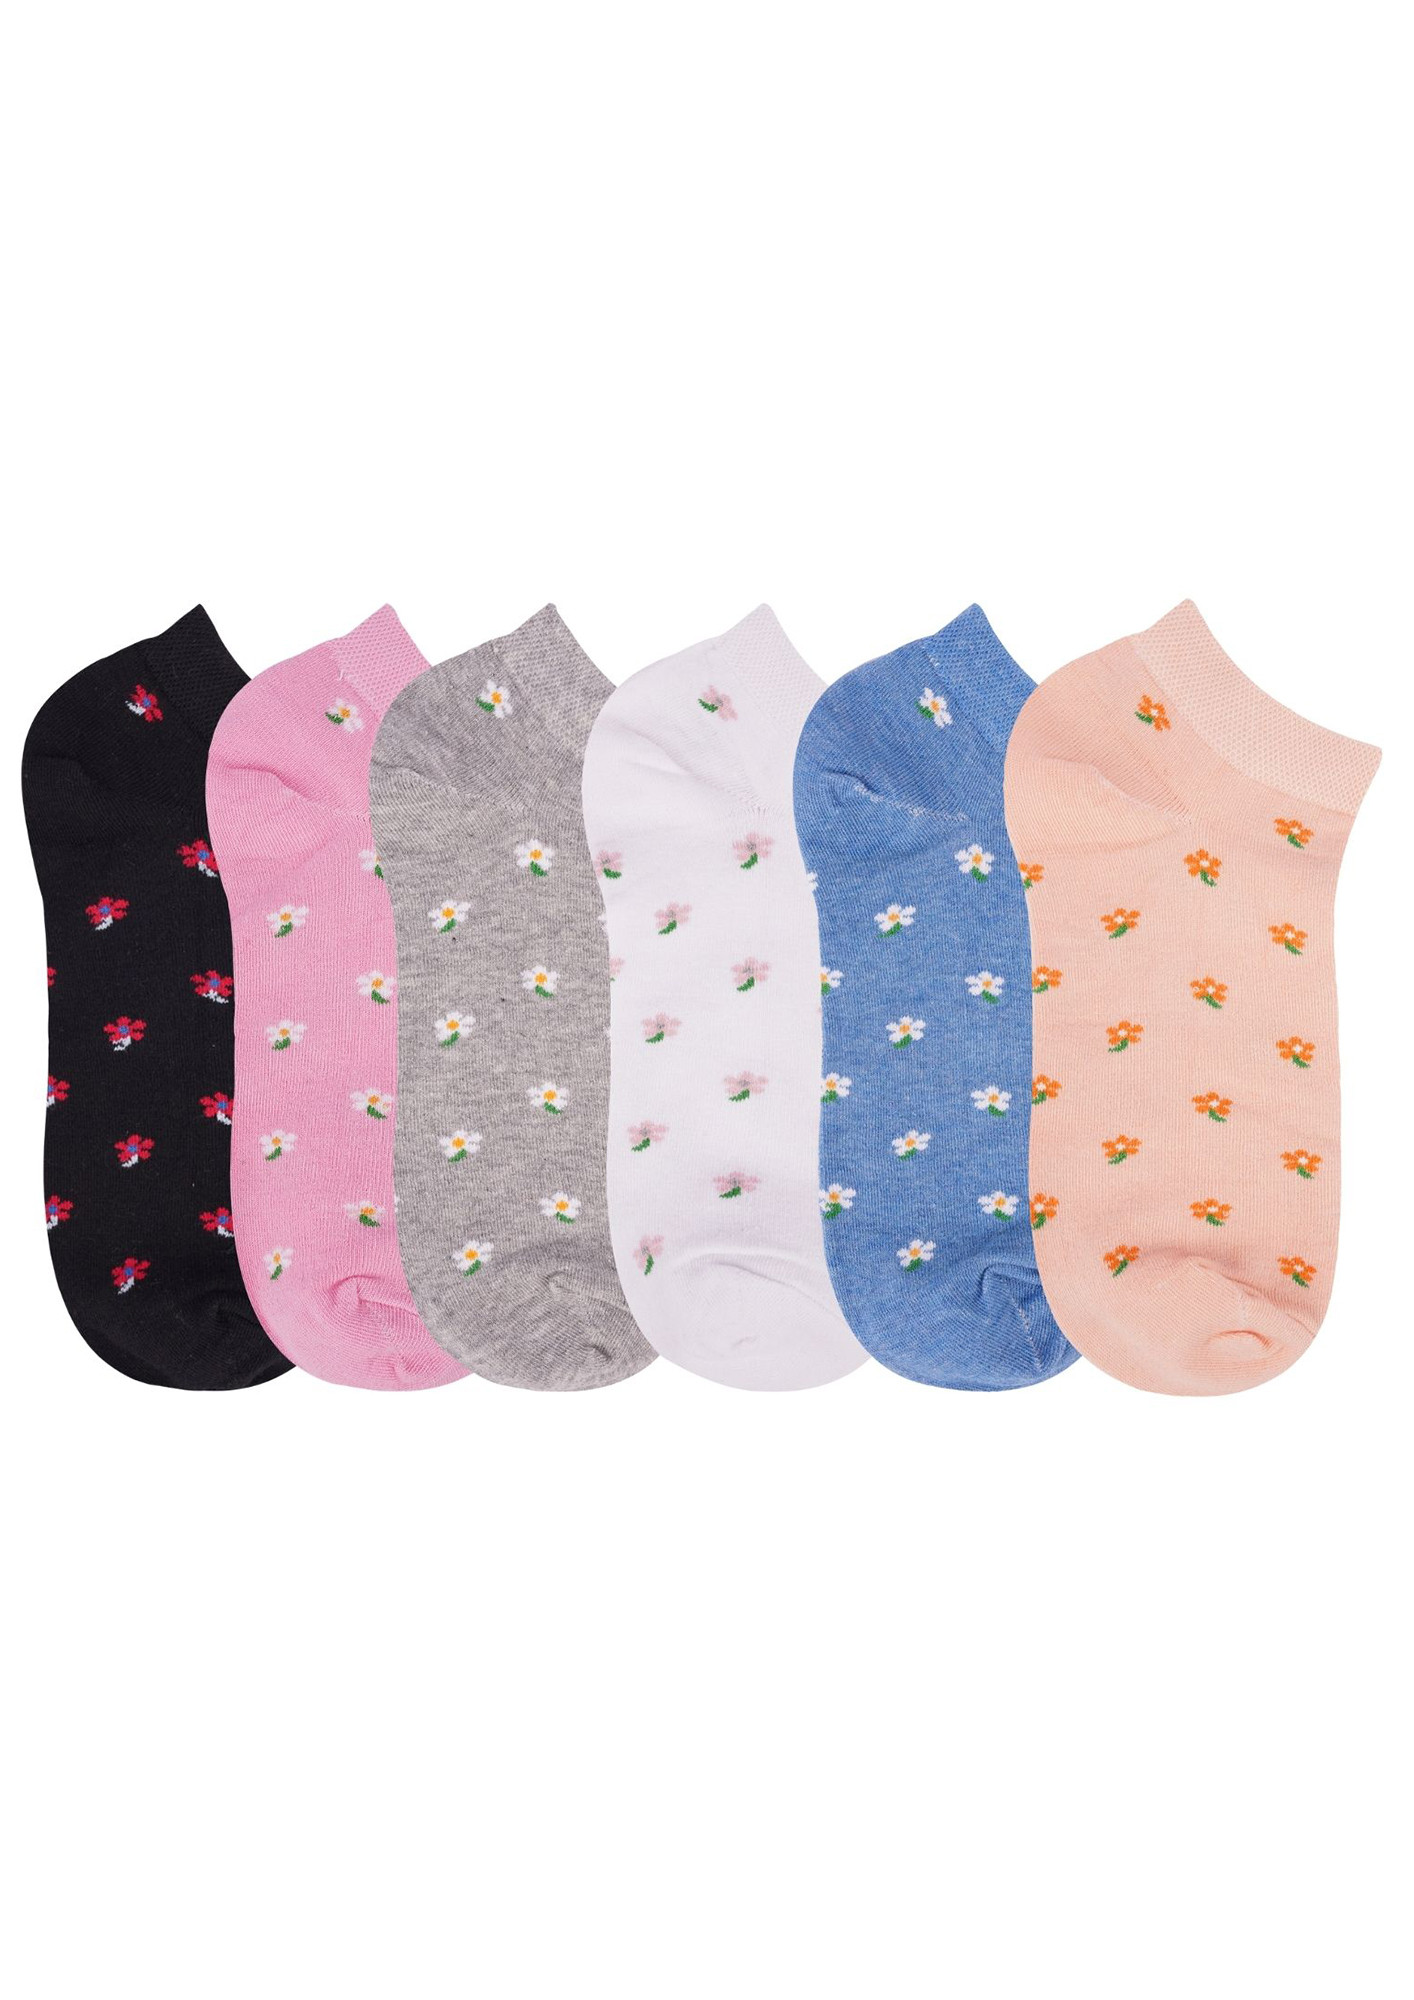 N2S NEXT2SKIN Women's Low Ankle Length Flower Pattern Cotton Socks - Pack of 6 Pairs, Multicolor